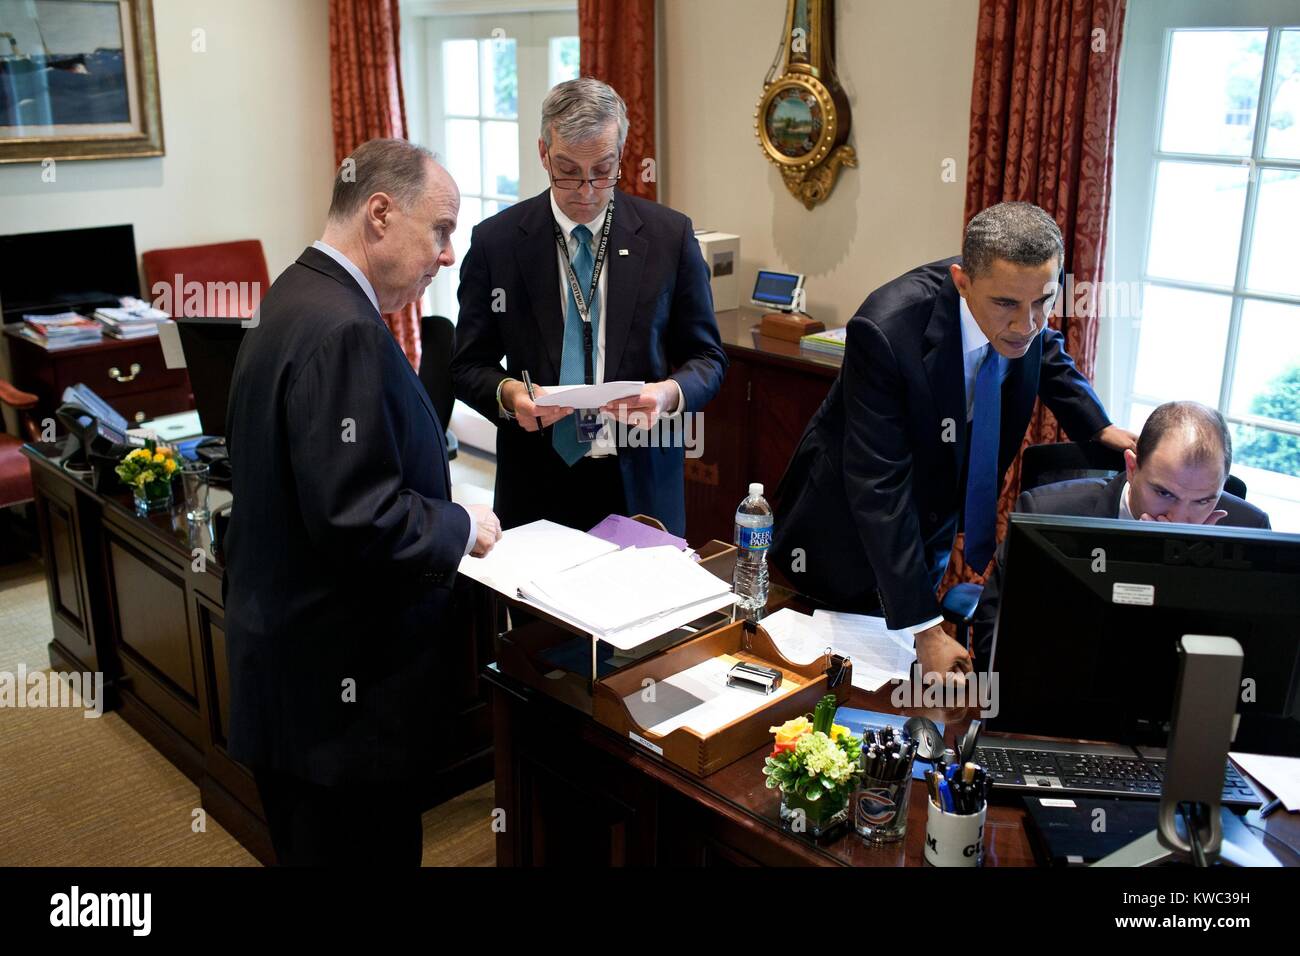 President Obama works on a speech about the Middle East with National Security staff. May 19, 2011. L-R: Nat'l Security Advisor Tom Donilon; Dep. Nat. Security Advisor Denis McDonough; the President; and Ben Rhodes, Dep. Nat'l Security Advisor for Strategic Communications. (BSLOC 2015 13 266) Stock Photo